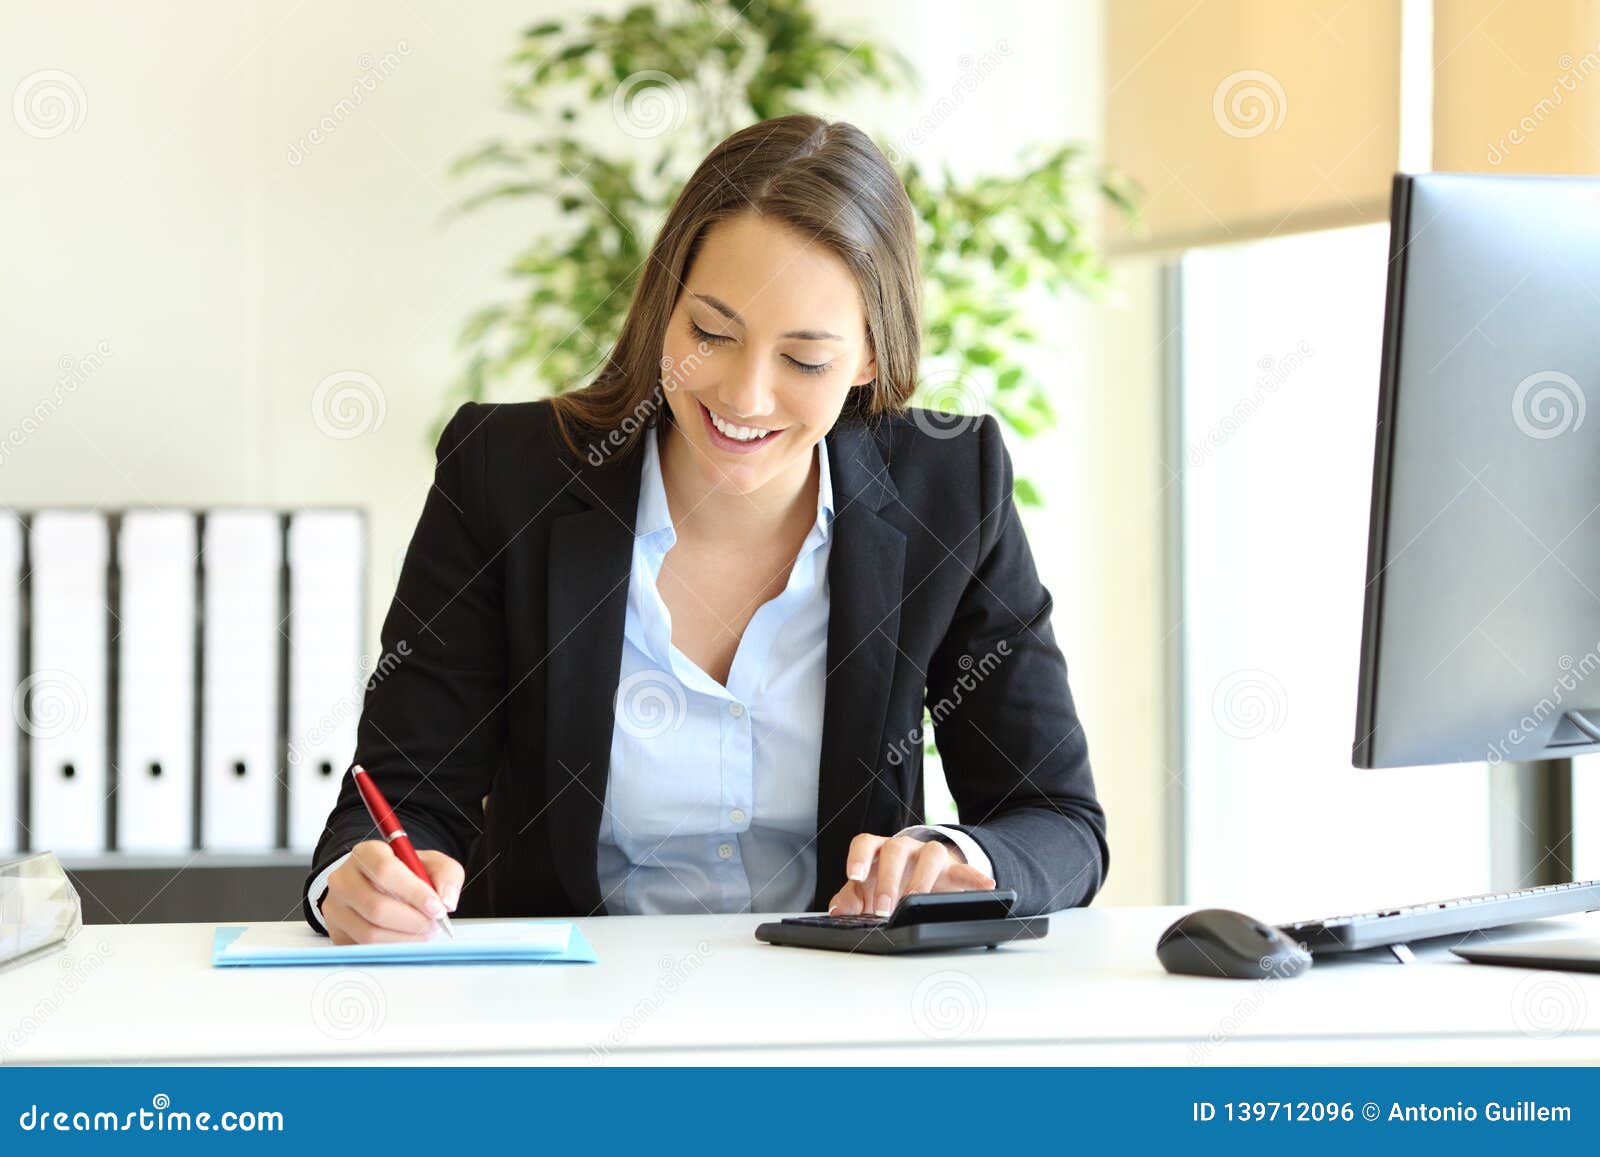 office worker calculating using calculator